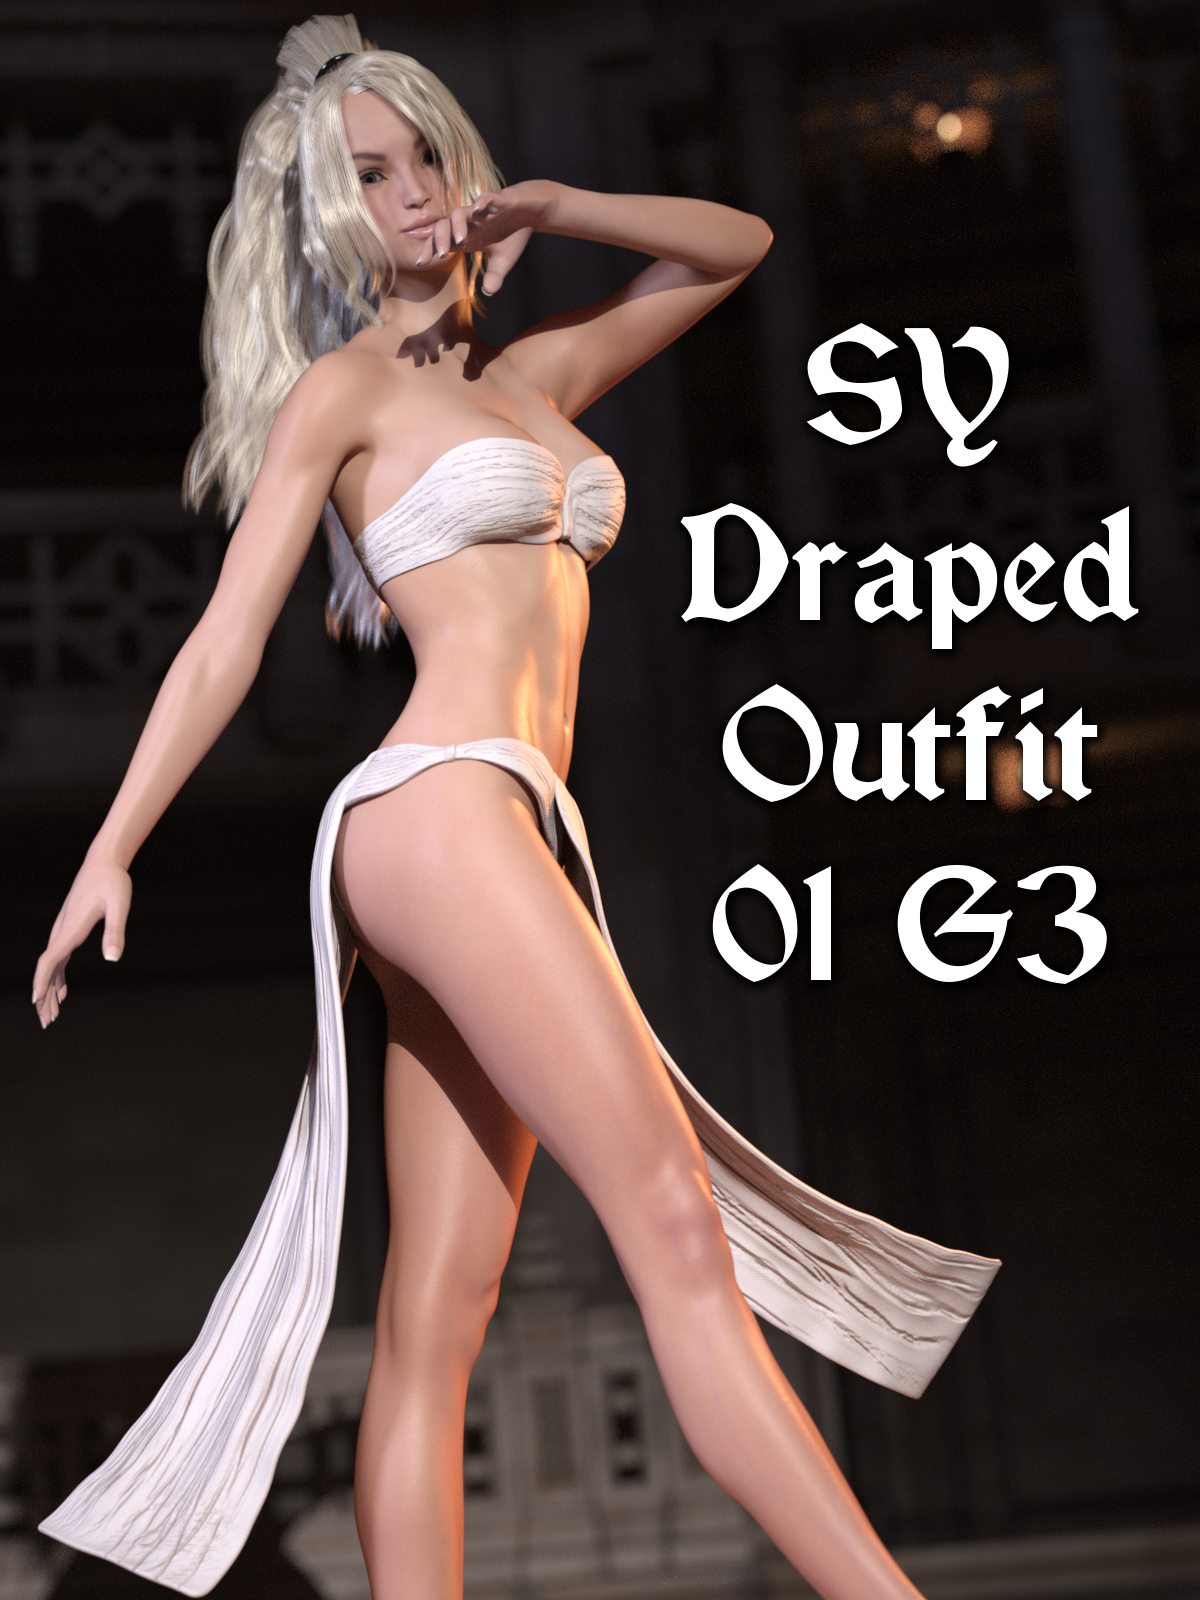 SY Draped Outfit 01 G3_DAZ3D下载站